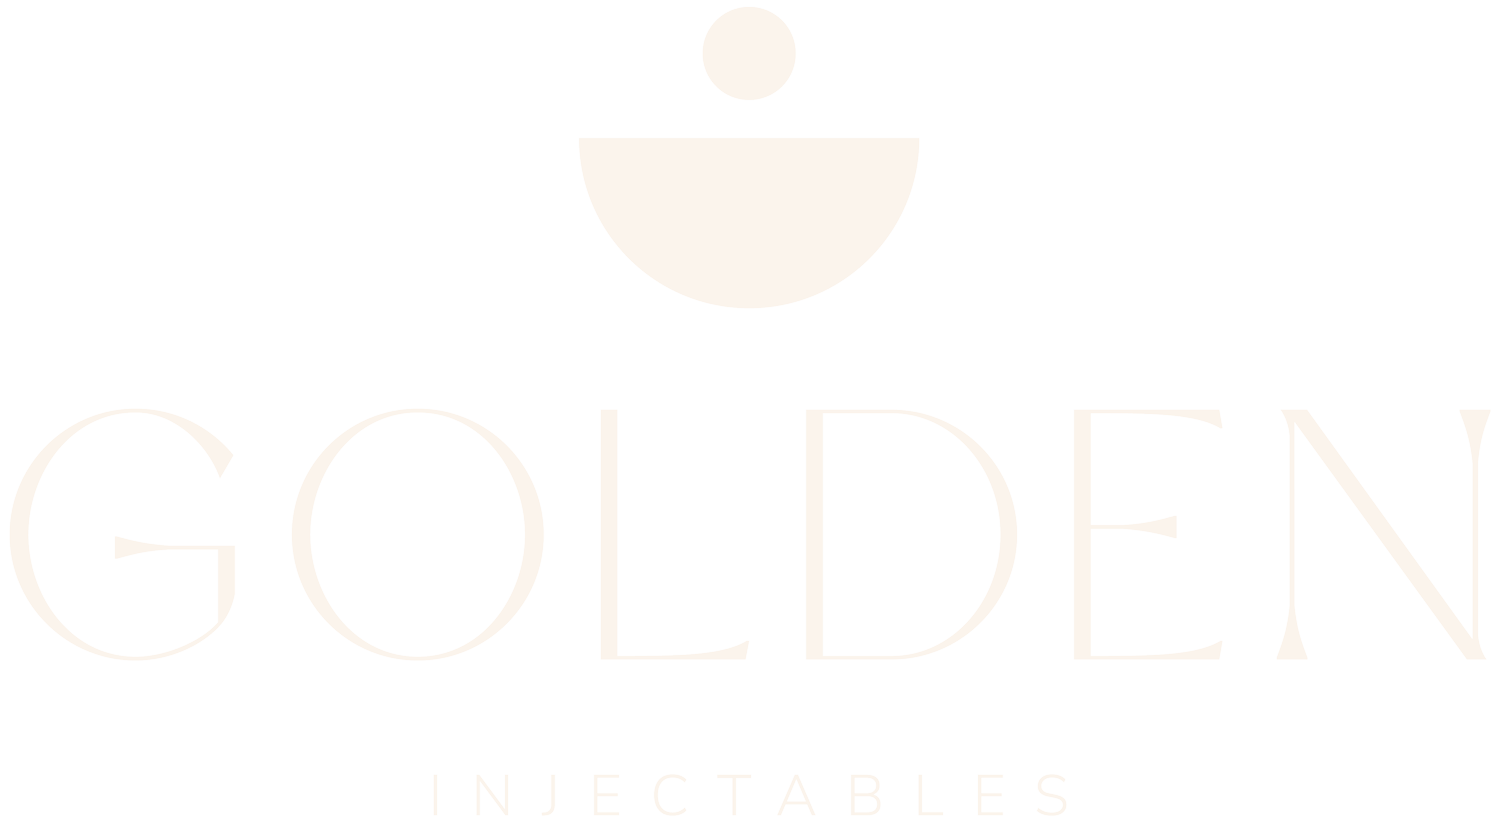 Golden Injectables